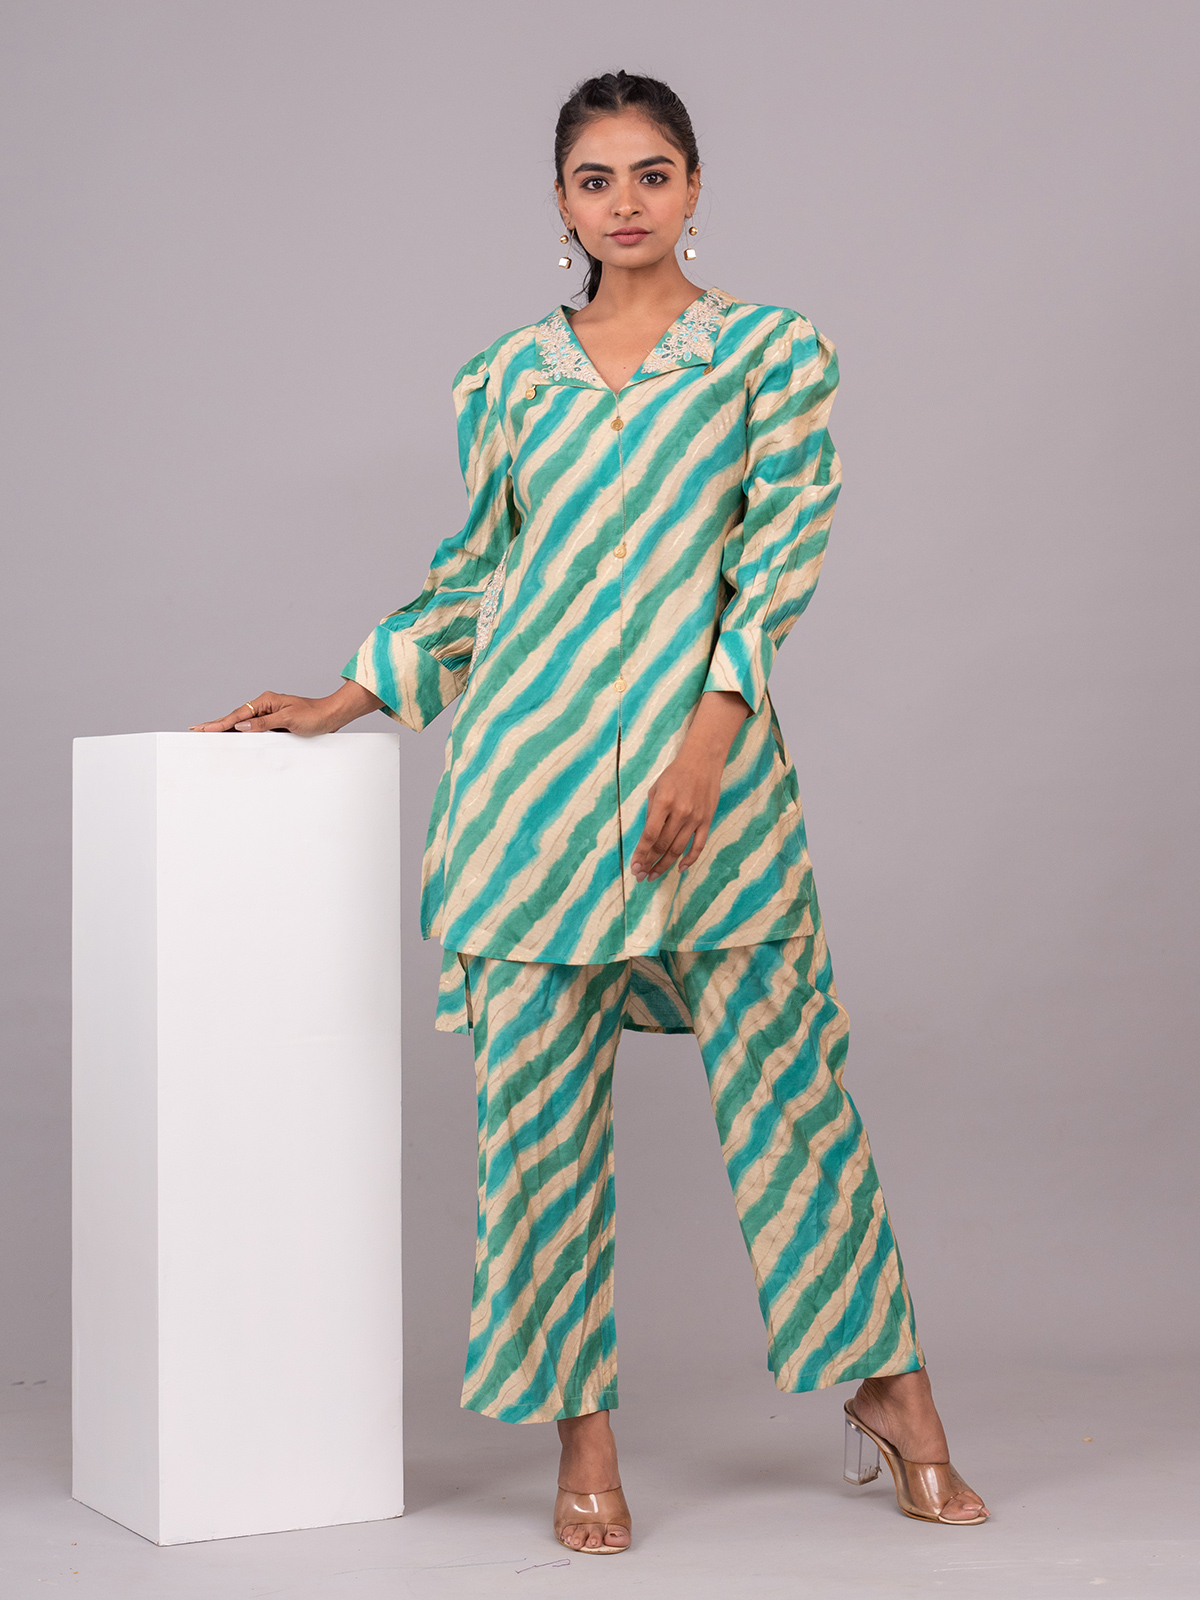 https://1099554485.rsc.cdn77.org/upload/products/green_and_blue_stripe_cotton_co_ord_set_1696247522as2799939_1.jpg